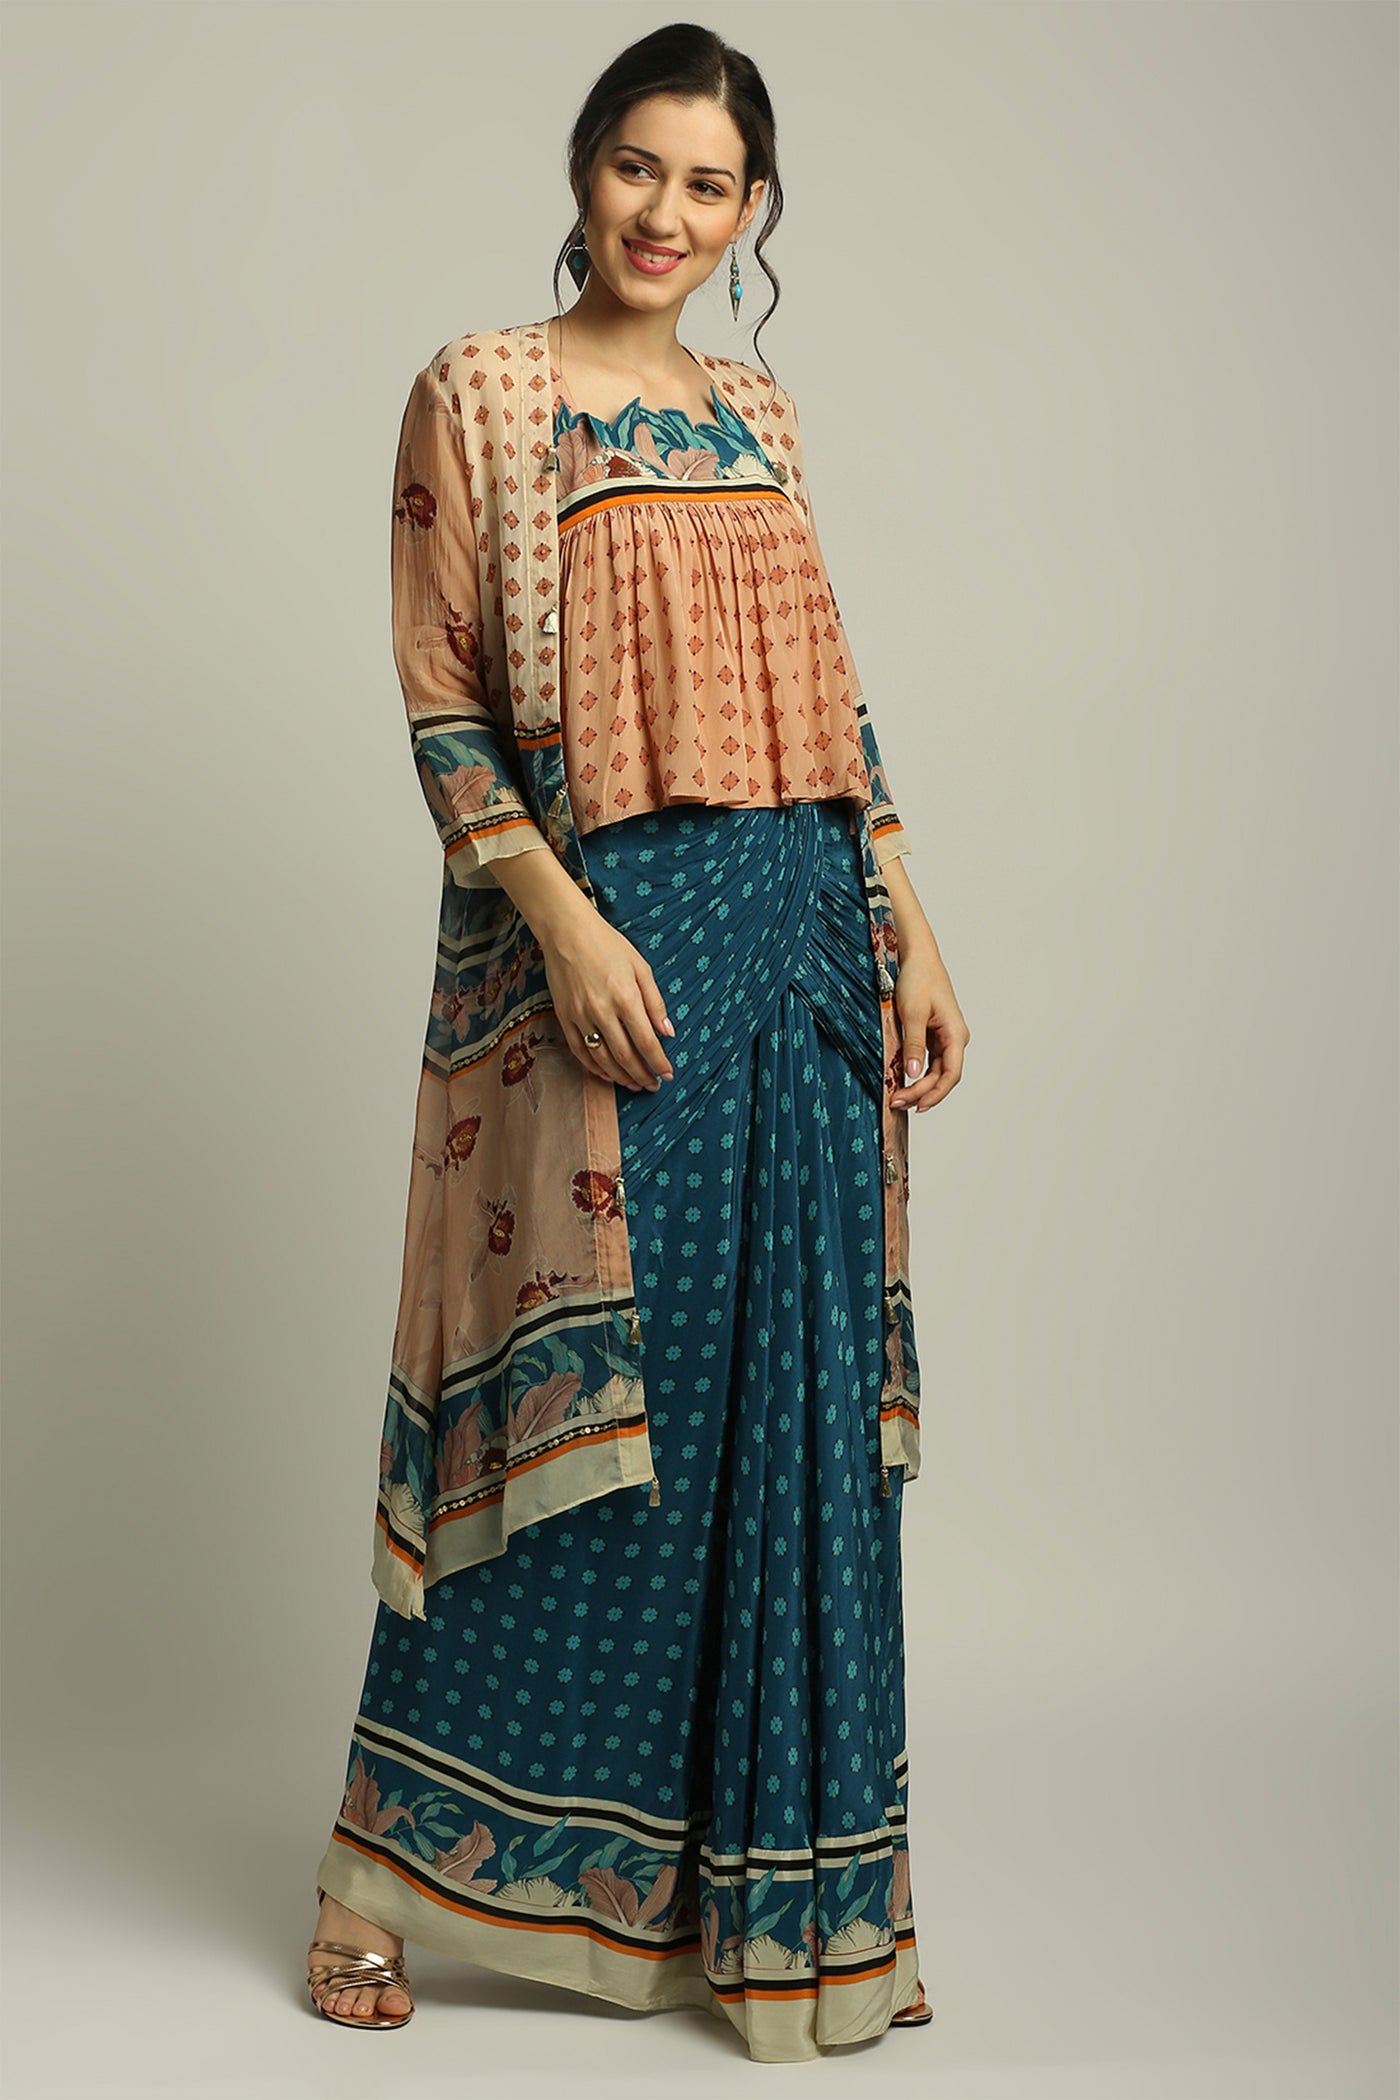 sougat paul Orchid bloom printed skirt set with jacket teal blue and peach fusion indian designer wear online shopping melange singapore